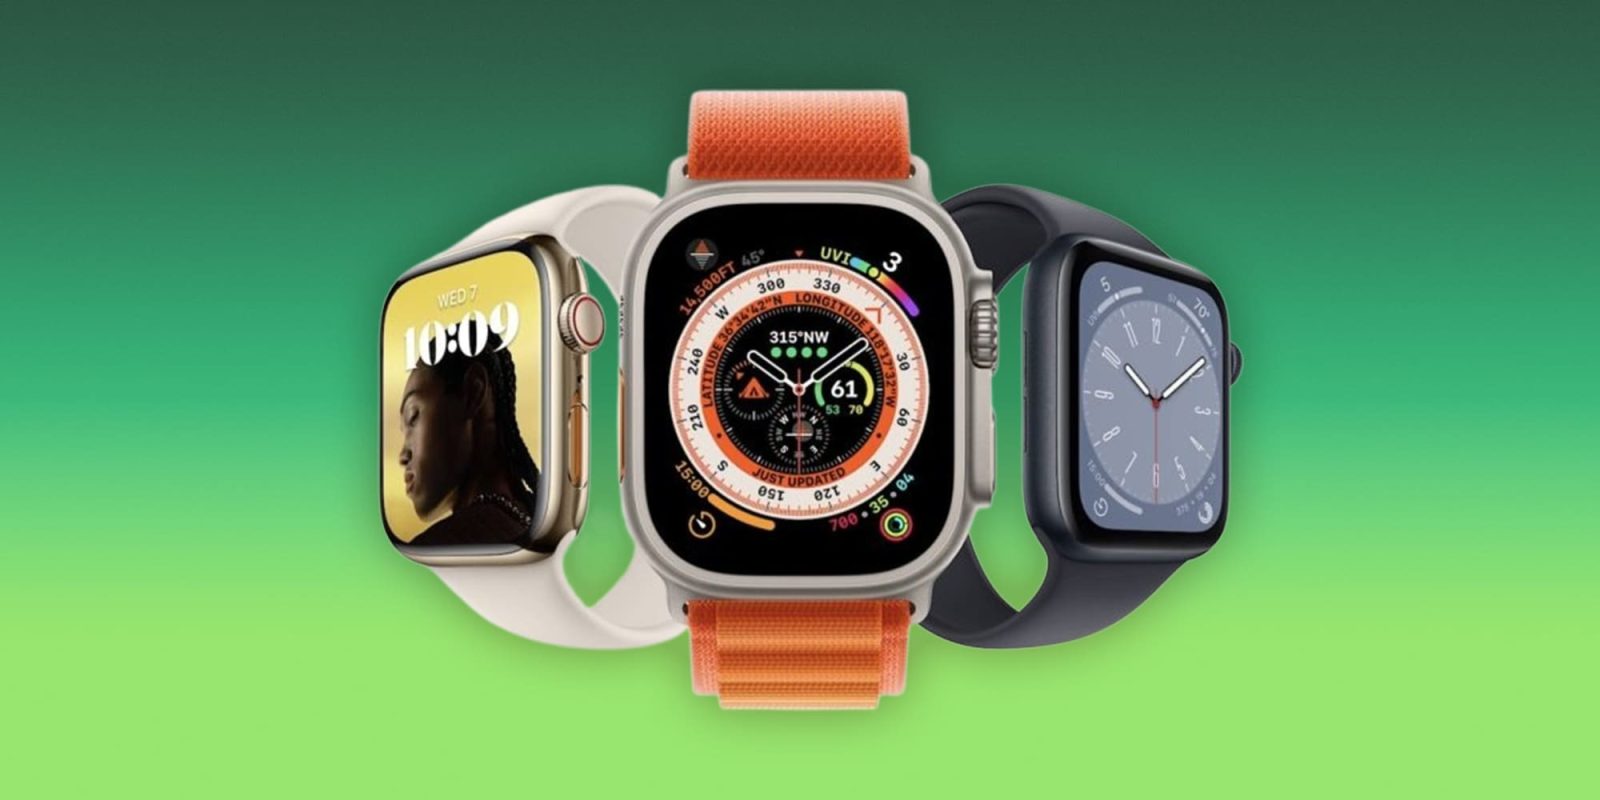 watchOS 9.1 beta 4 update is now available to developers